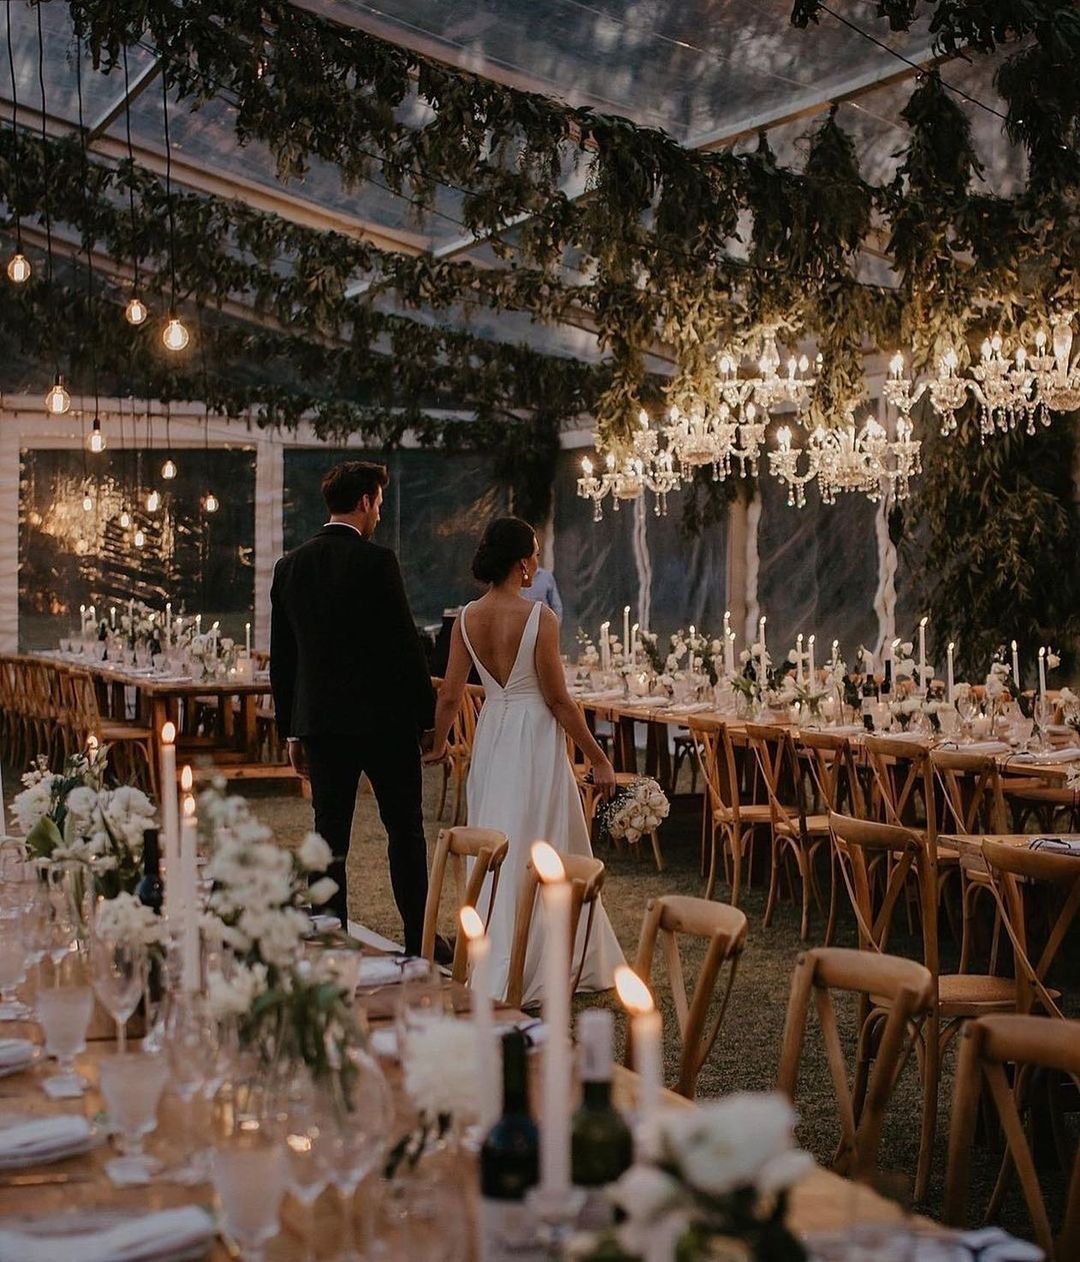 8 Things To Keep In Mind While Planning A Small Intimate Wedding.jpg